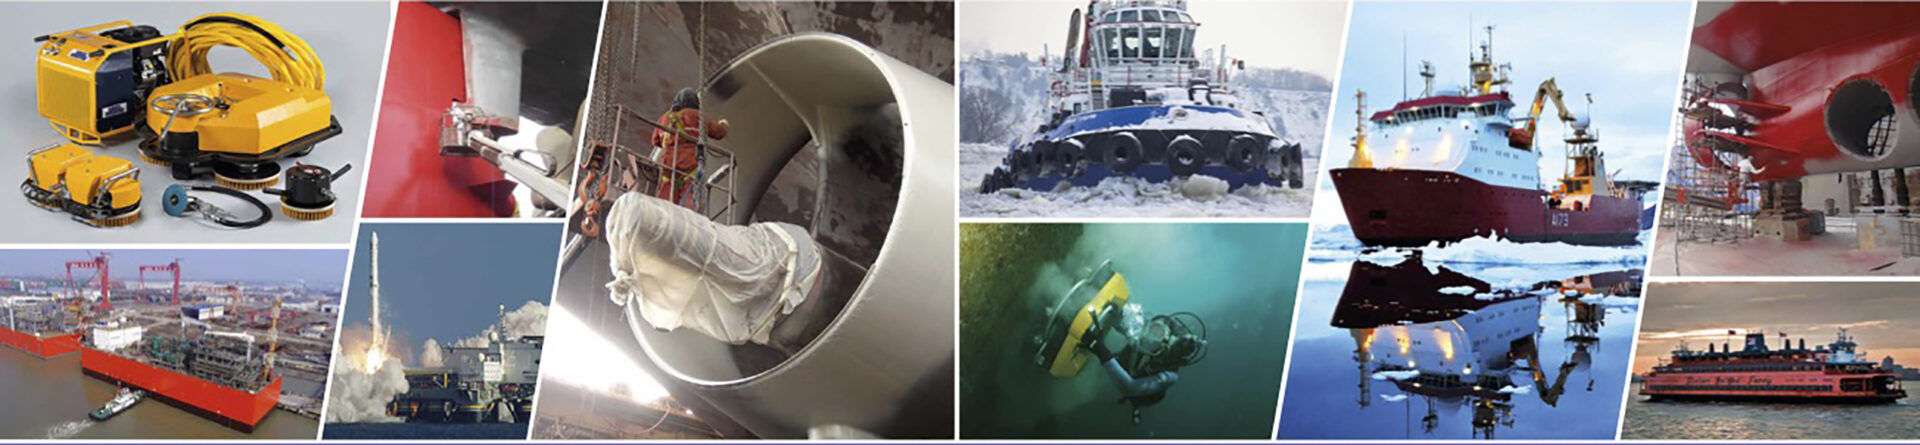 Collage of Subsea Industries photos